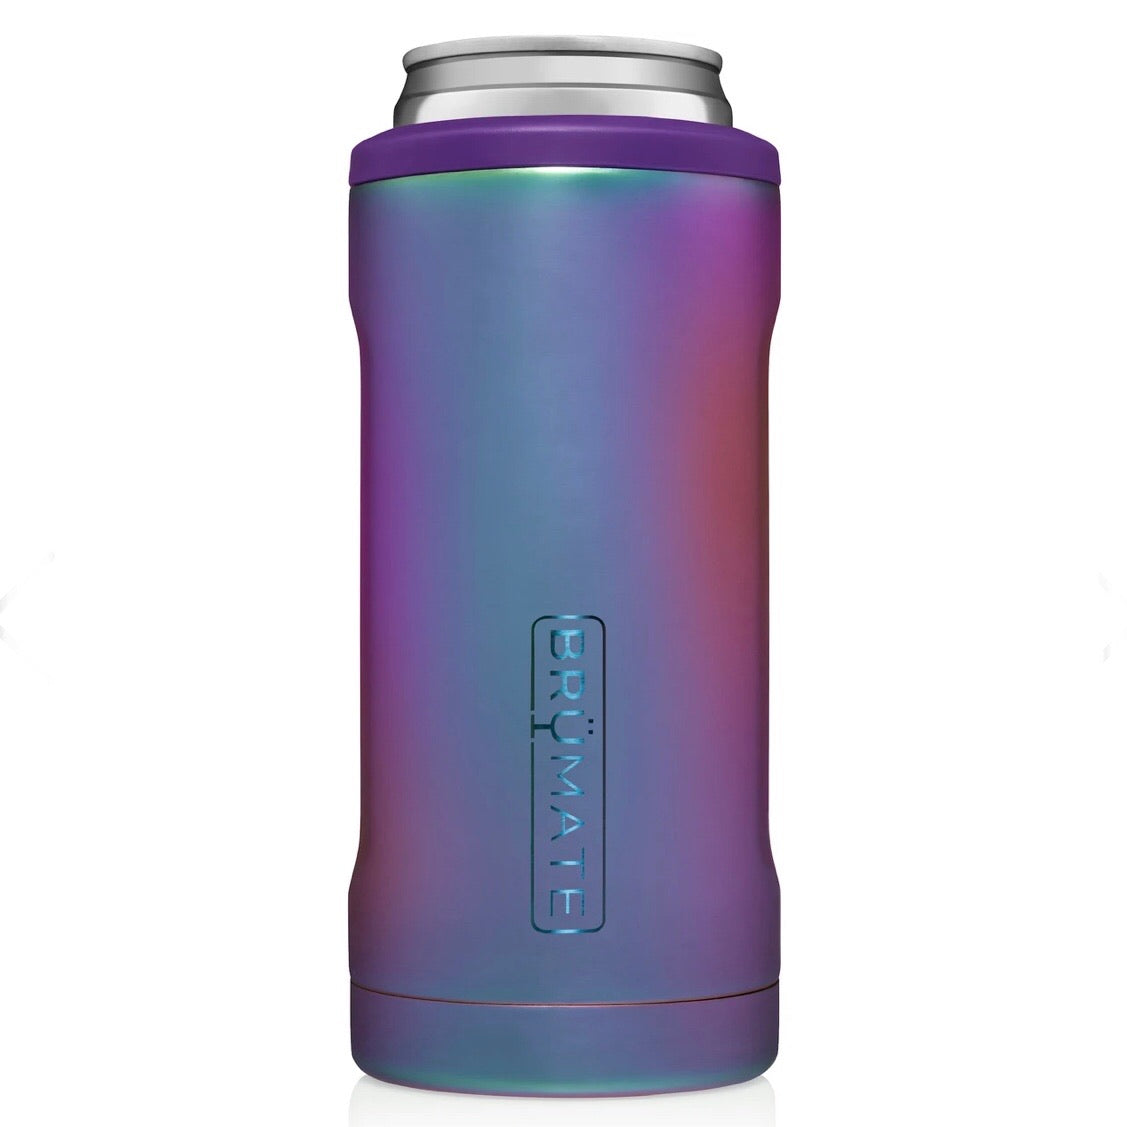 slim cans leak-proof drinkware hot to cold insulated drinkware tumbler like yeti brumate spillproof ombre purple